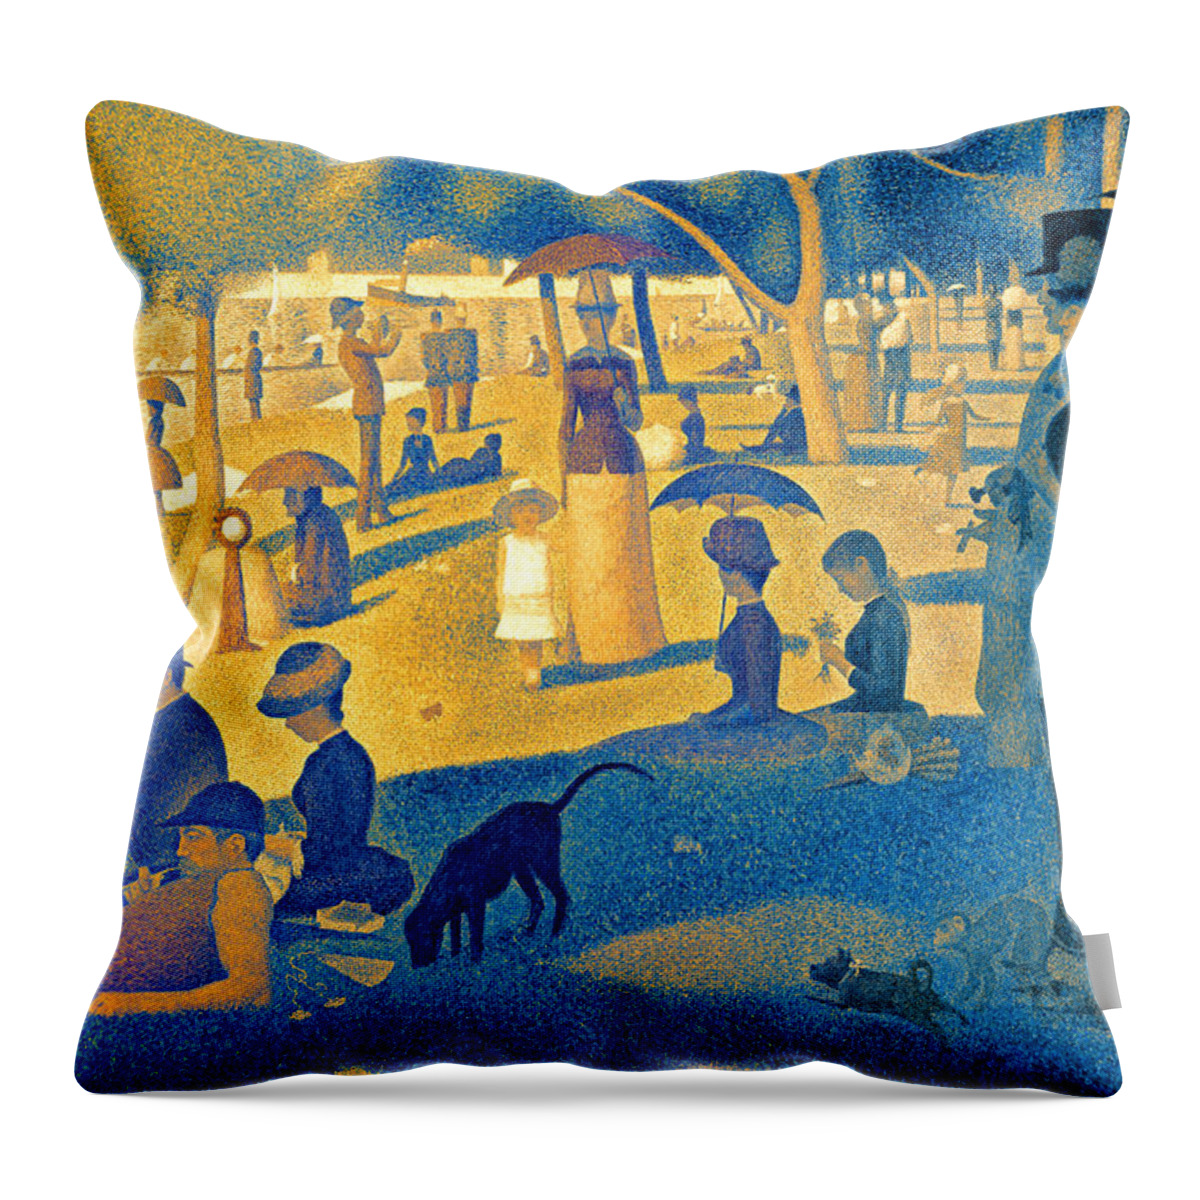 A Sunday Afternoon On The Island Of La Grande Jatte Throw Pillow featuring the digital art A Sunday Afternoon on the Island of La Grande Jatte - digital recreation in blue and orange by Nicko Prints